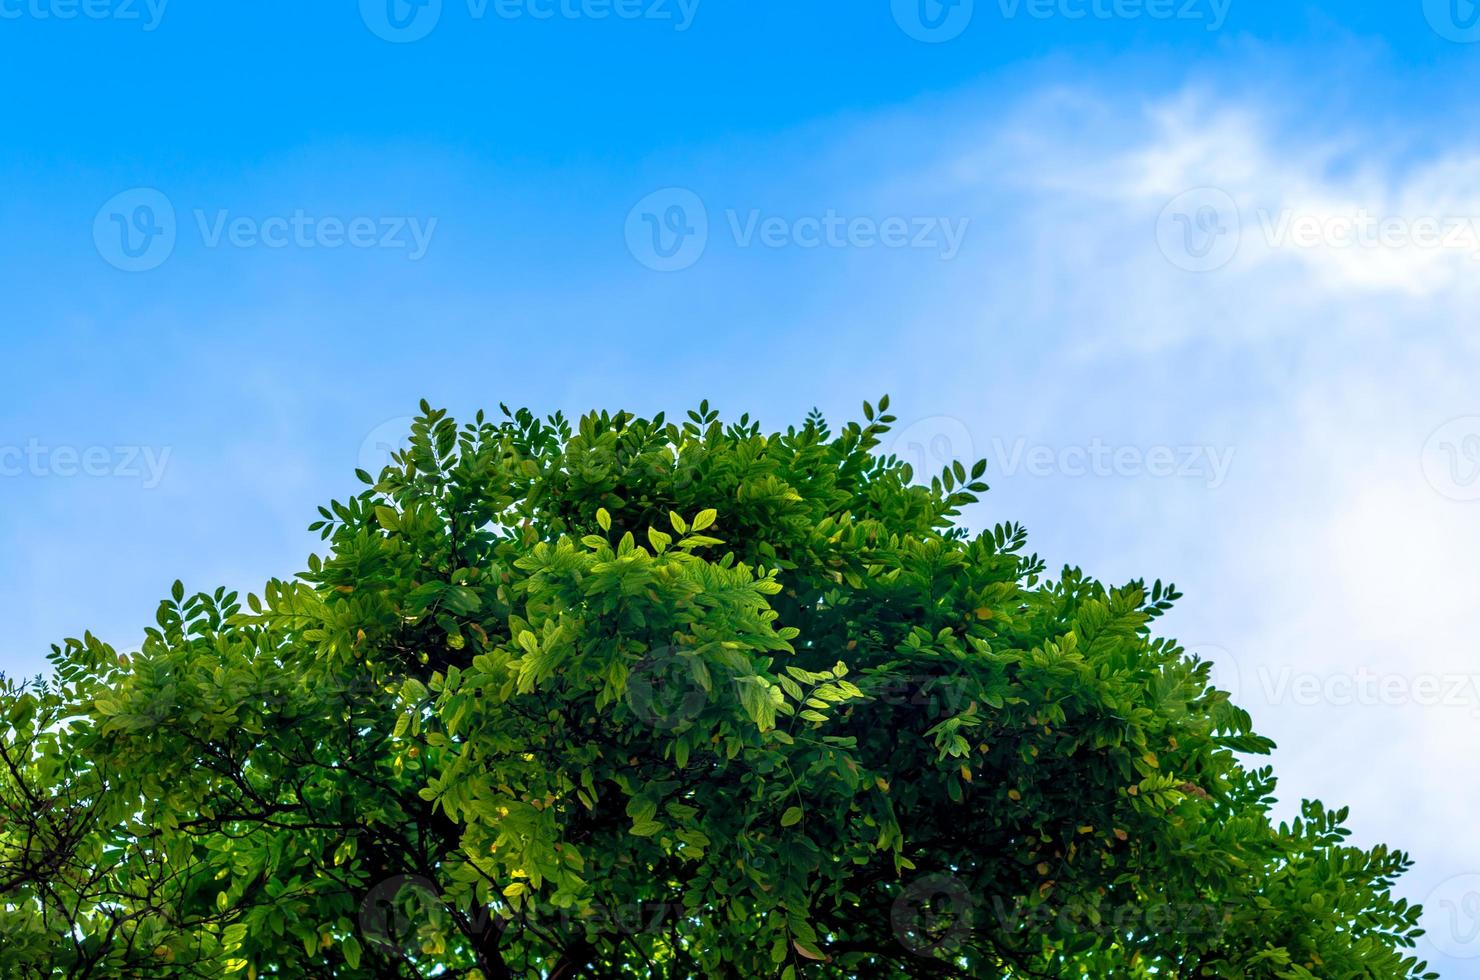 branches of a tree with green leaves against a blue sky with white clouds photo